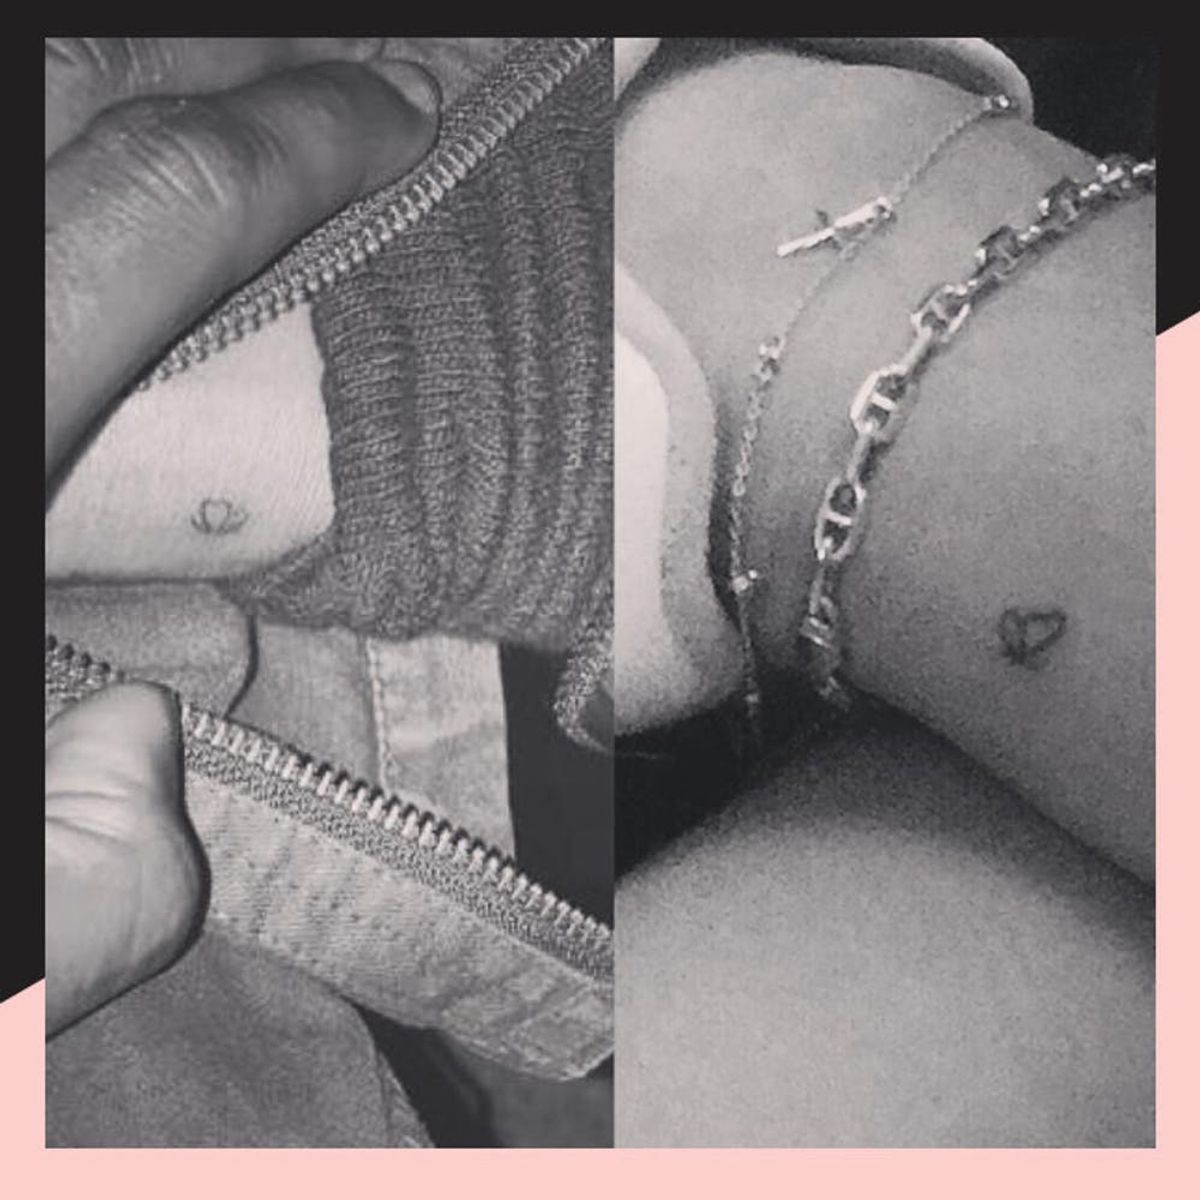 Fans Think *This* Kylie Jenner Tattoo Holds the Secret to Her Daughter’s Name